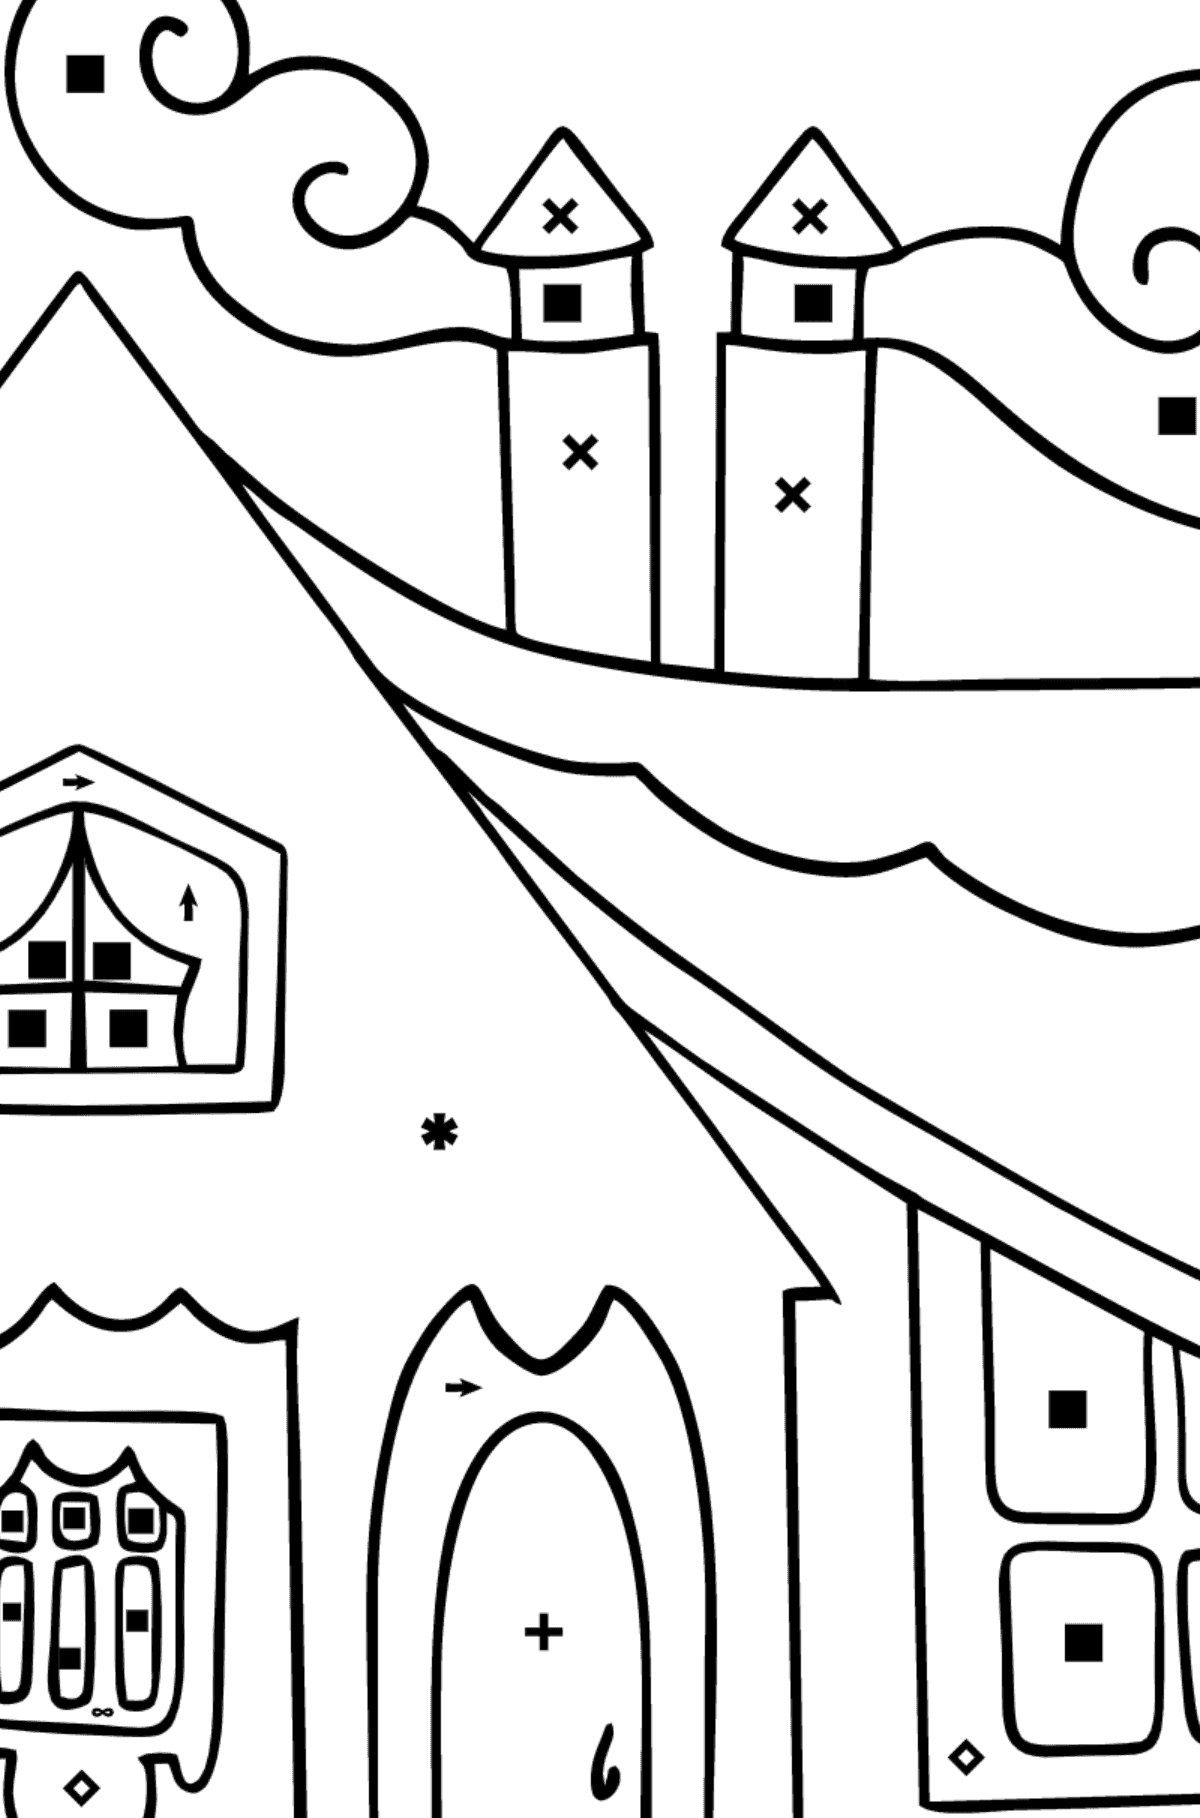 Simple Coloring Page - A Tiny House for Kids  - Color by Special Symbols